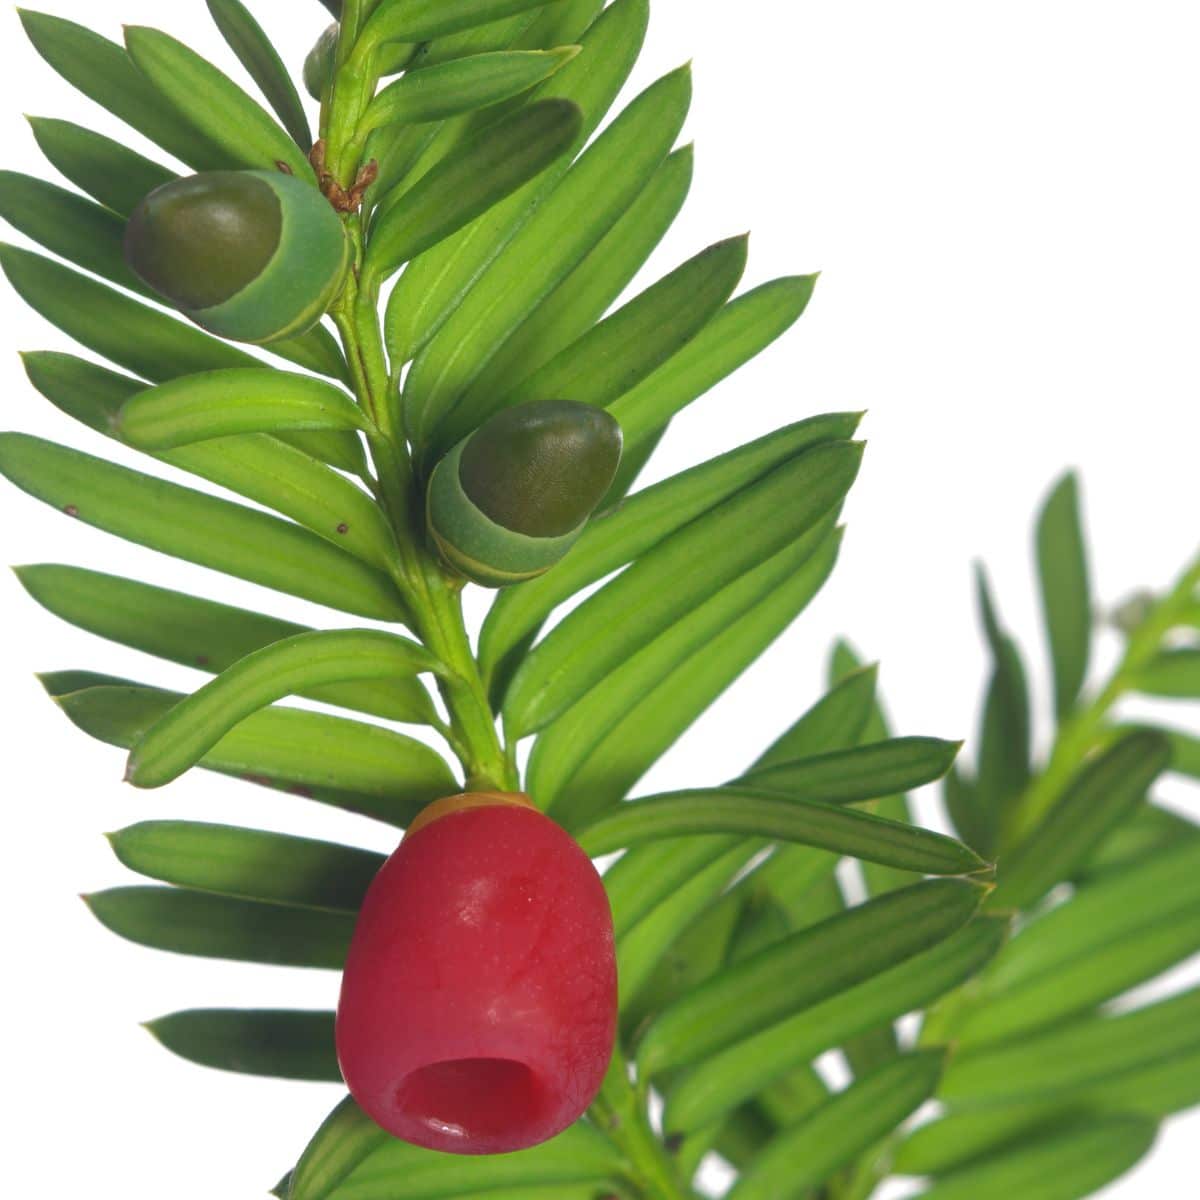 Yew berry on a green branch on a white background.